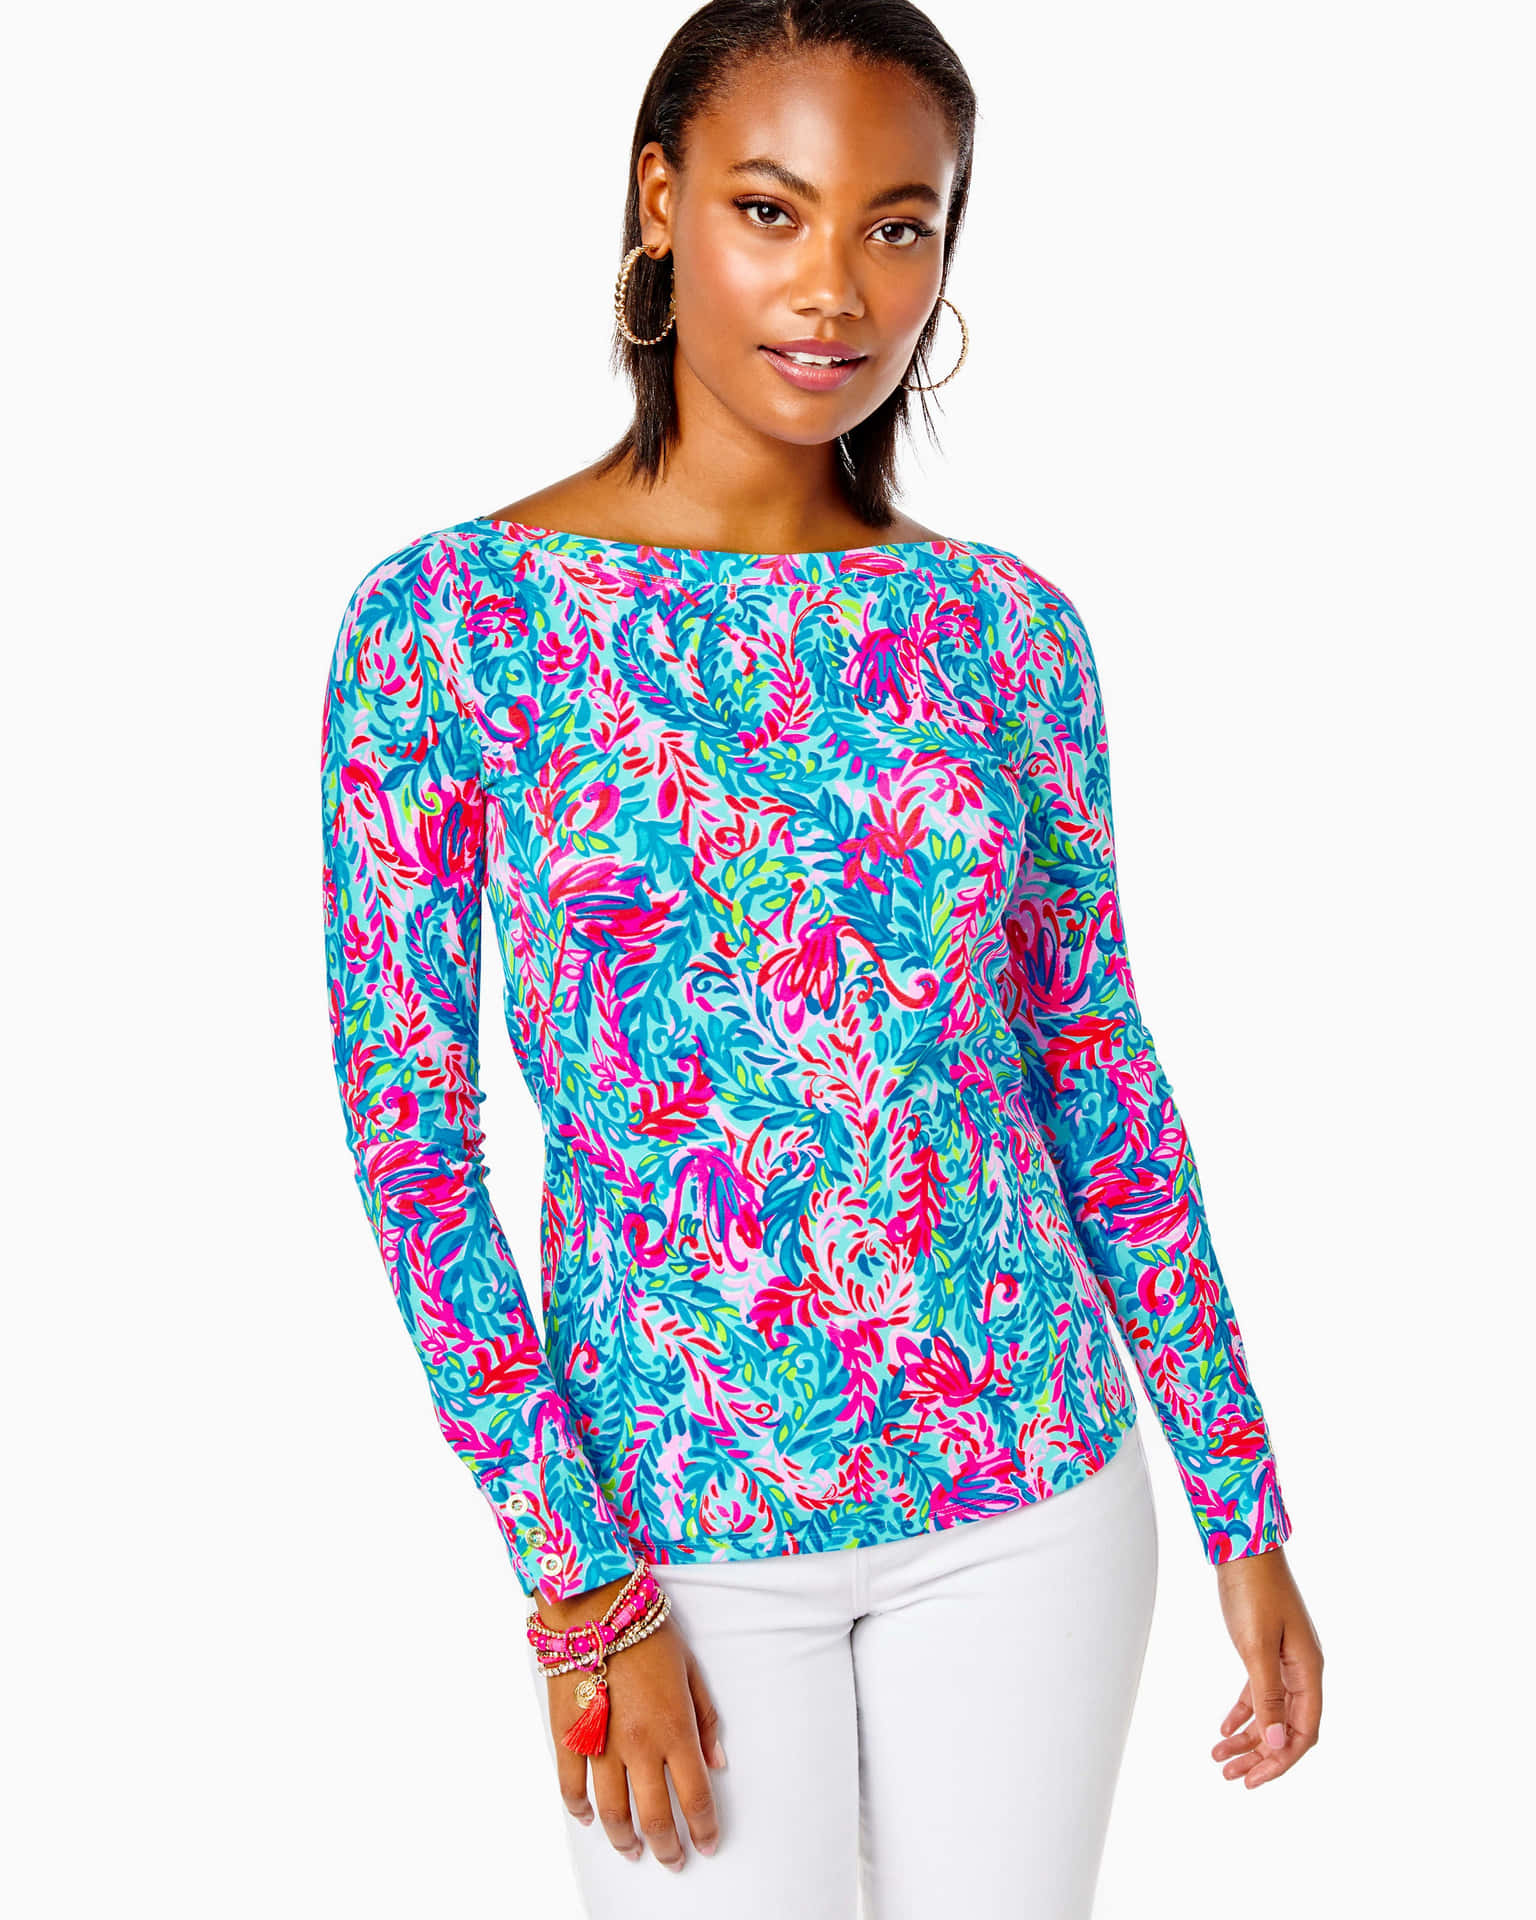 Step Up Your Style in Lilly Pulitzer